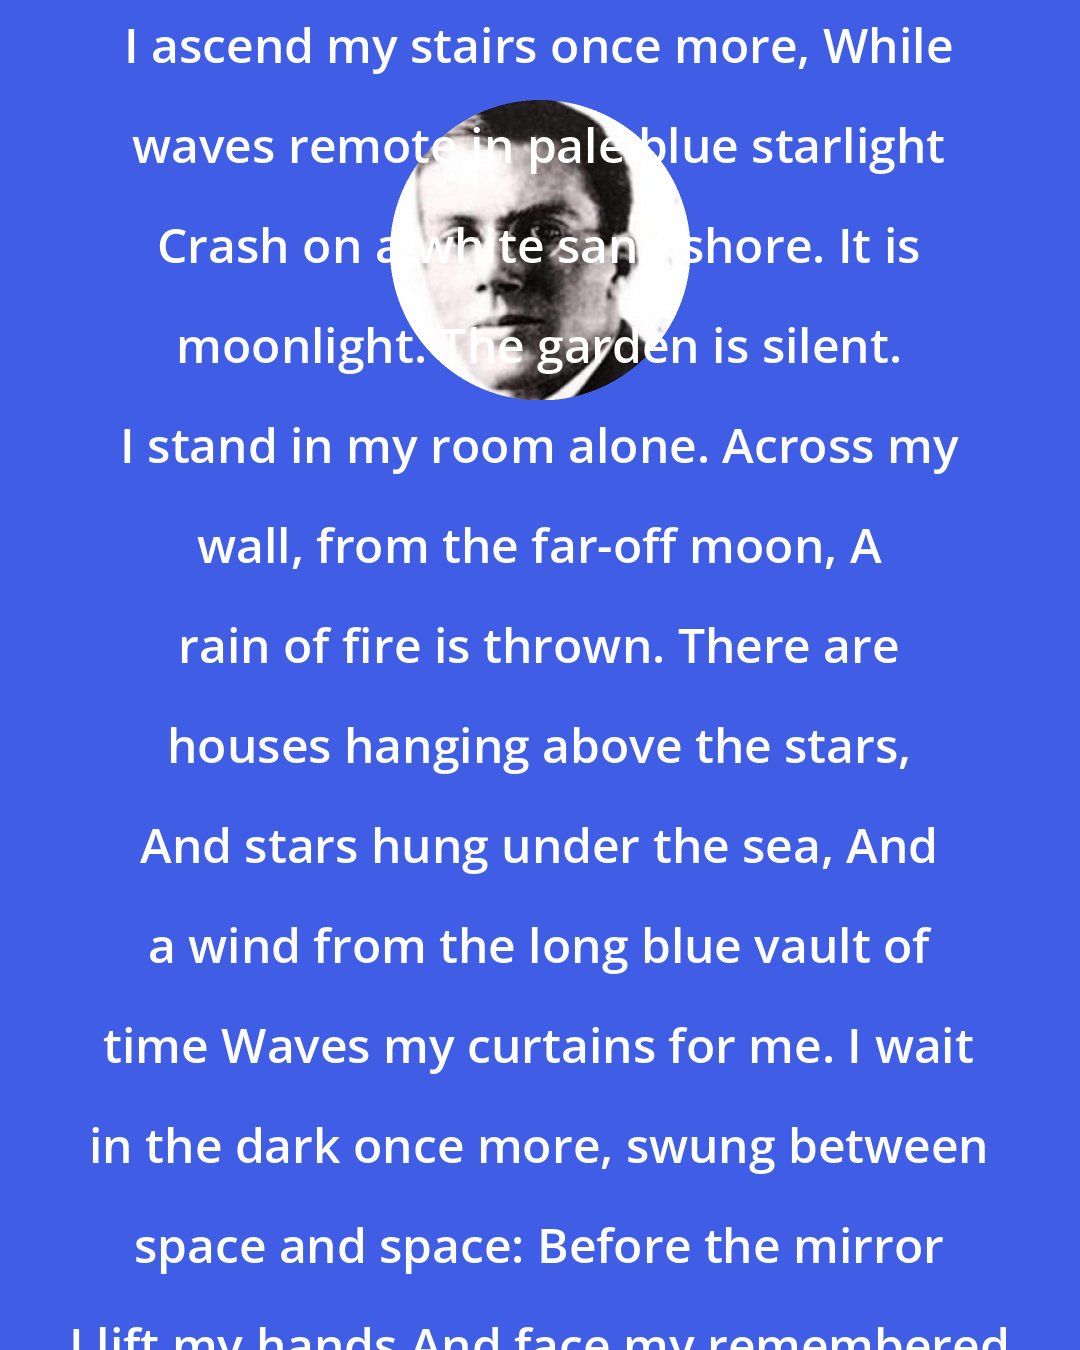 Conrad Aiken: It is moonlight. Alone in the silence I ascend my stairs once more, While waves remote in pale blue starlight Crash on a white sand shore. It is moonlight. The garden is silent. I stand in my room alone. Across my wall, from the far-off moon, A rain of fire is thrown. There are houses hanging above the stars, And stars hung under the sea, And a wind from the long blue vault of time Waves my curtains for me. I wait in the dark once more, swung between space and space: Before the mirror I lift my hands And face my remembered face.